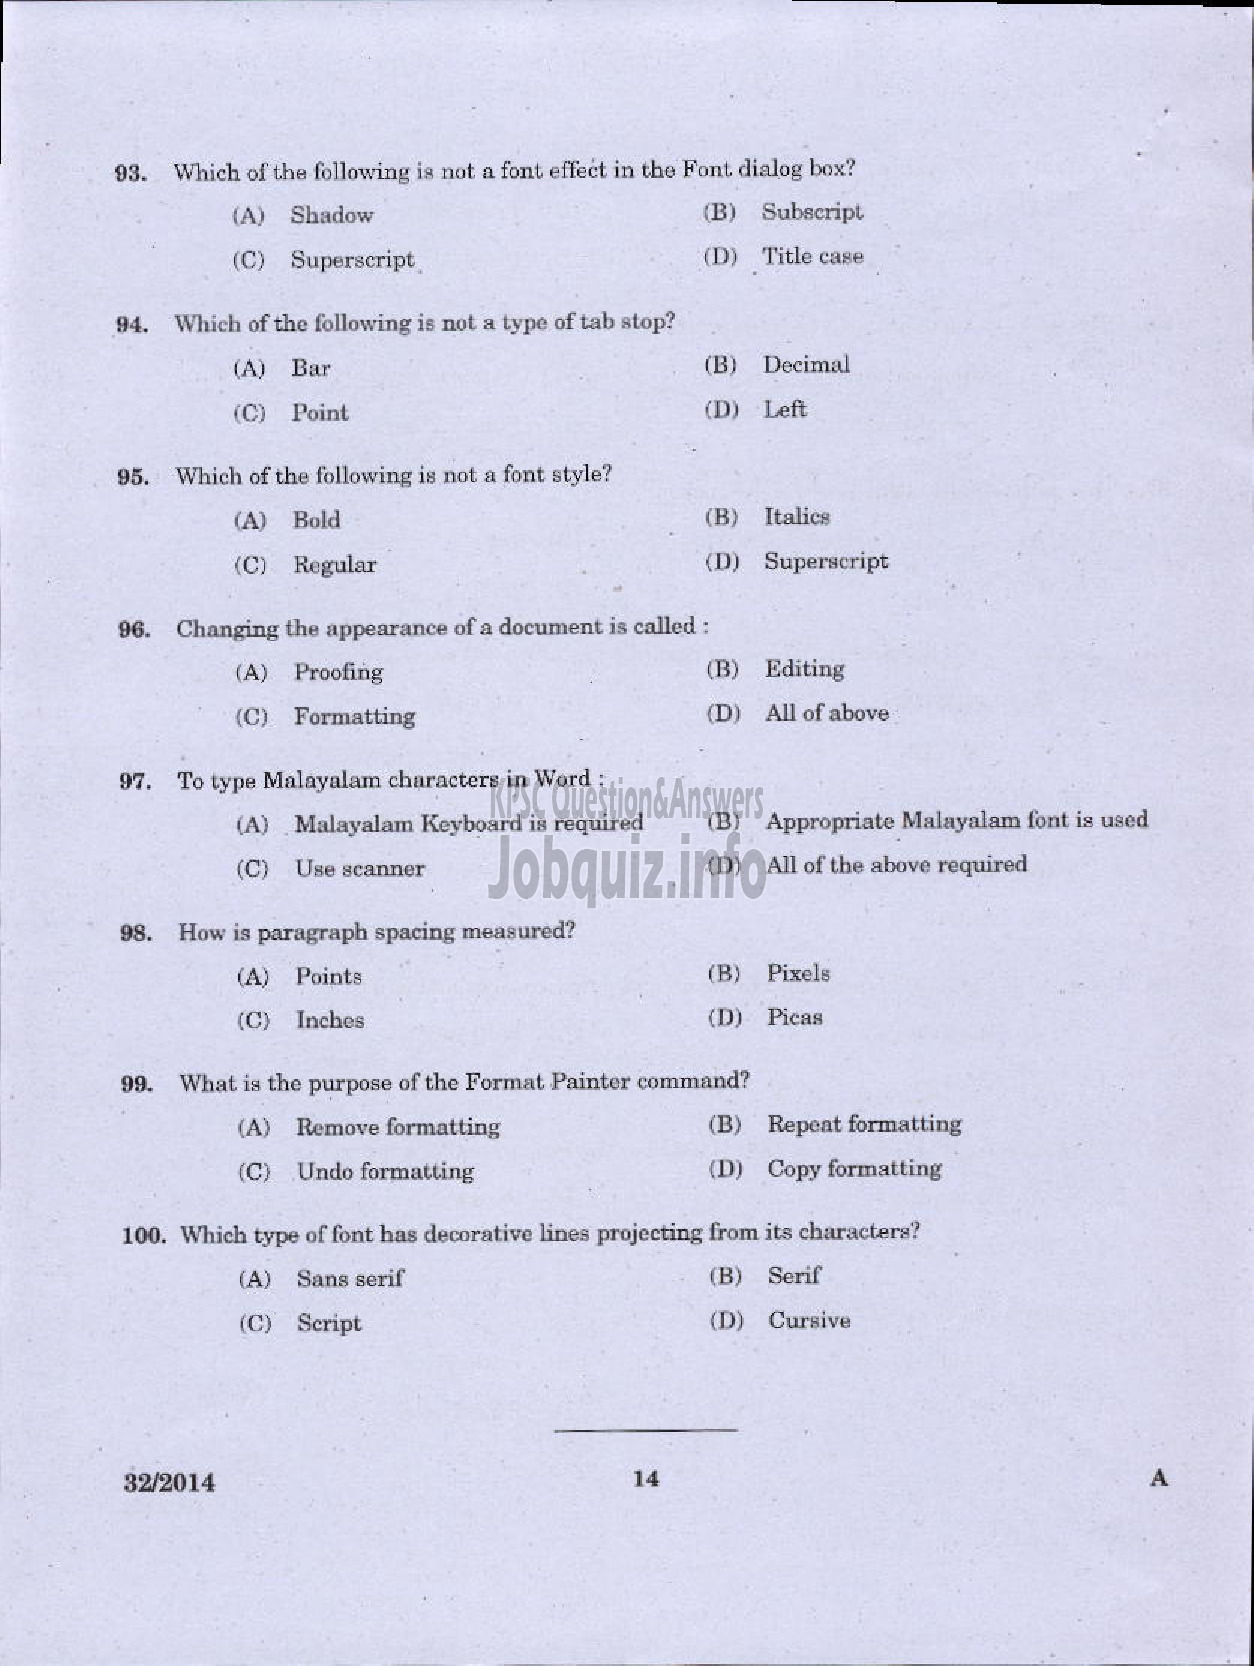 Kerala PSC Question Paper - LOWER DIVISION TYPIST NCA VARIOUS GOVERNMENT OWNED COMPANIES IDKY-12